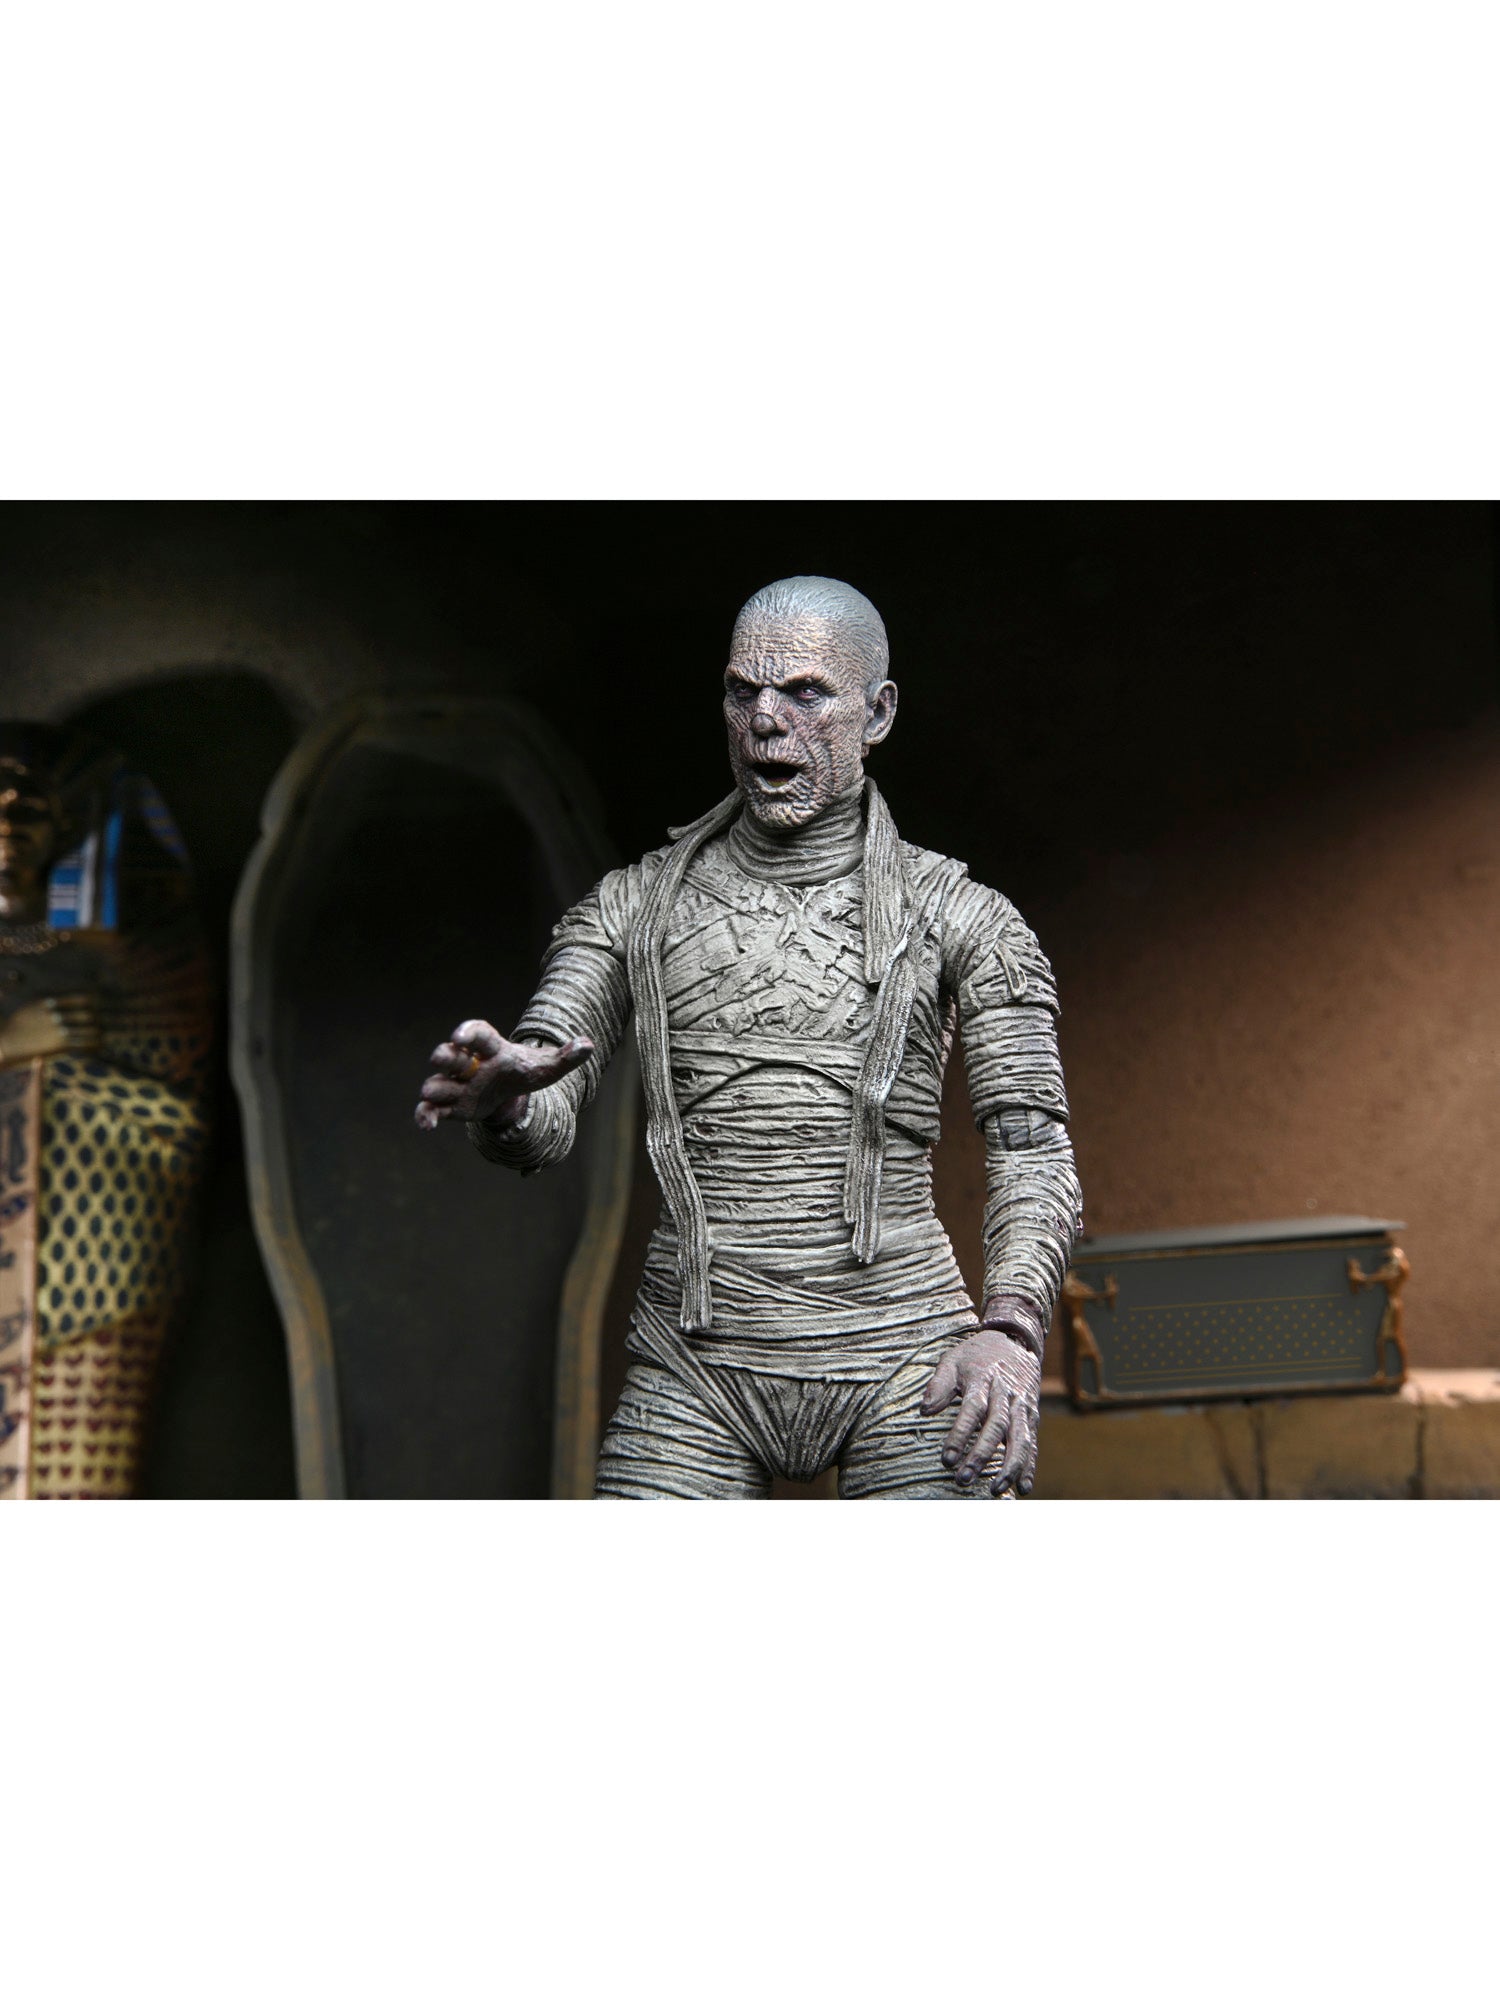 NECA - Universal Monsters - 7" Scale Action Figure - Ultimate Mummy (Color) - costumes.com